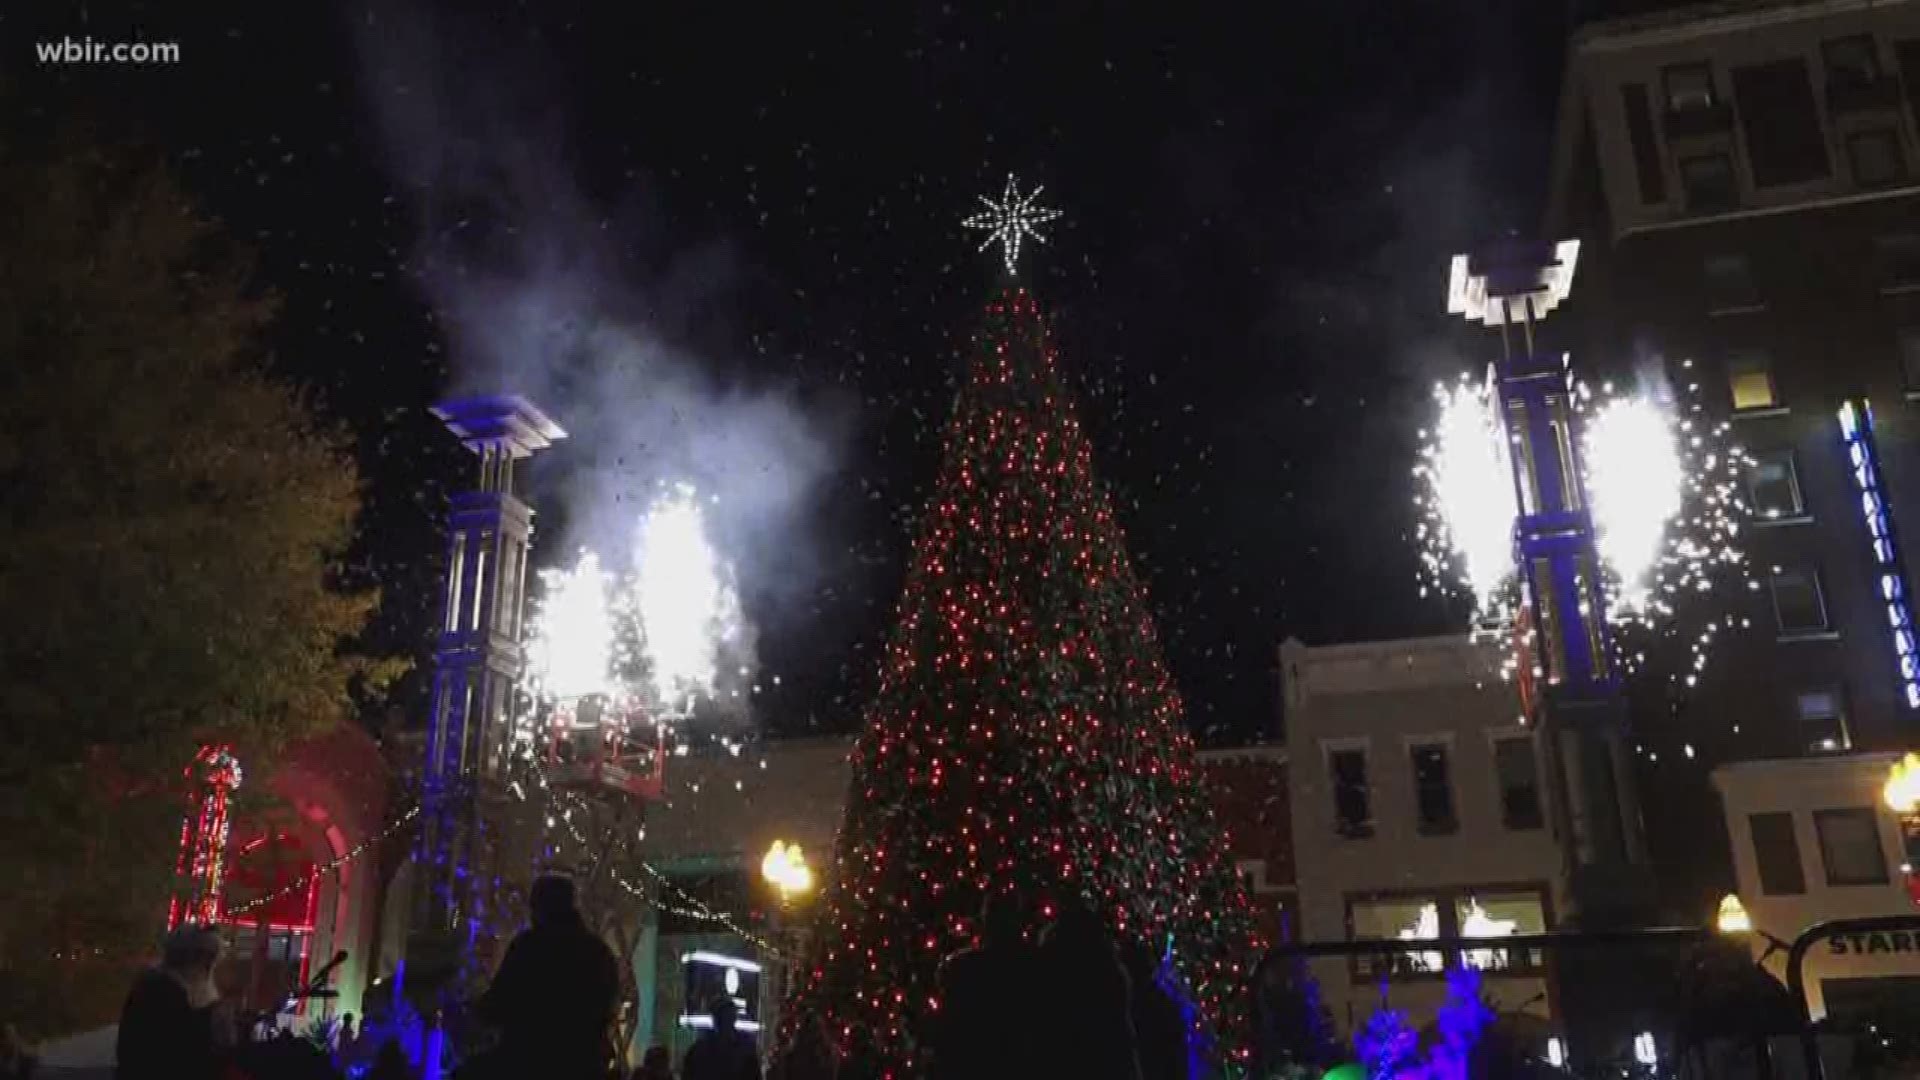 It's officially Christmas time in Knoxville now that the tree is lit downtown in Krutch Park.